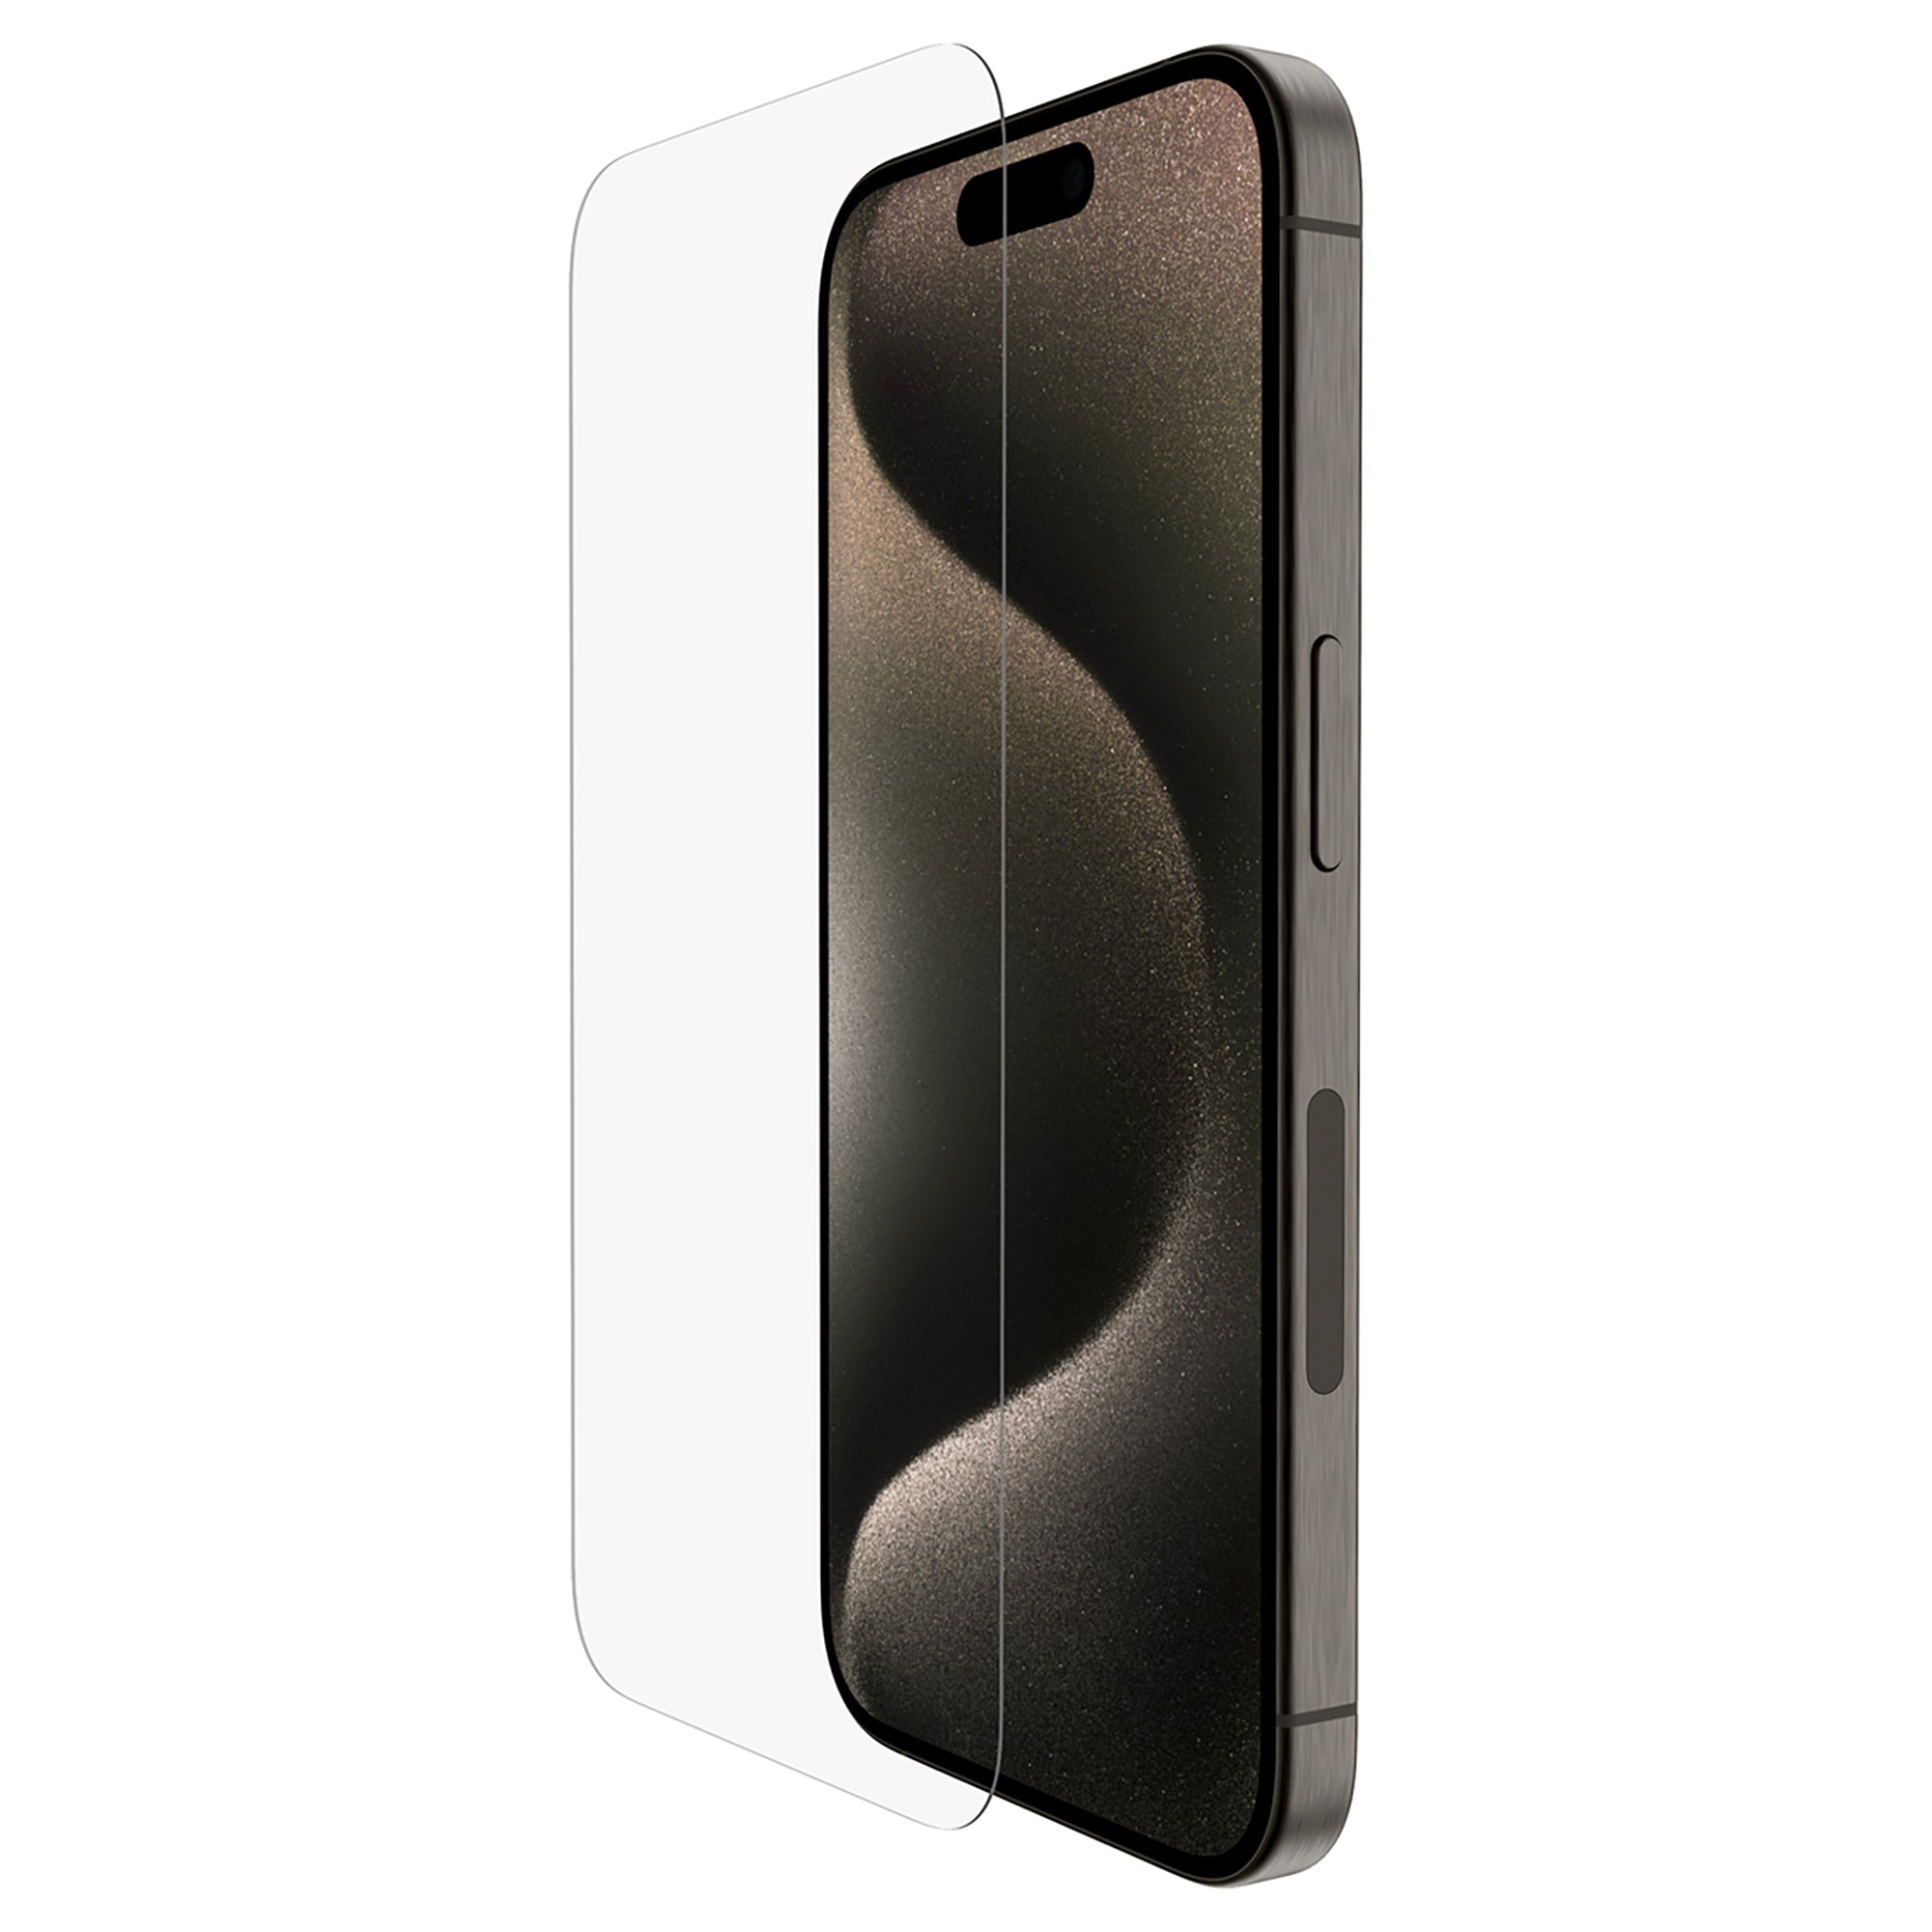 The back of an iphone 11 with a Skärmskydd - Premium Glas screen protector for added härdat glas and Skydd.